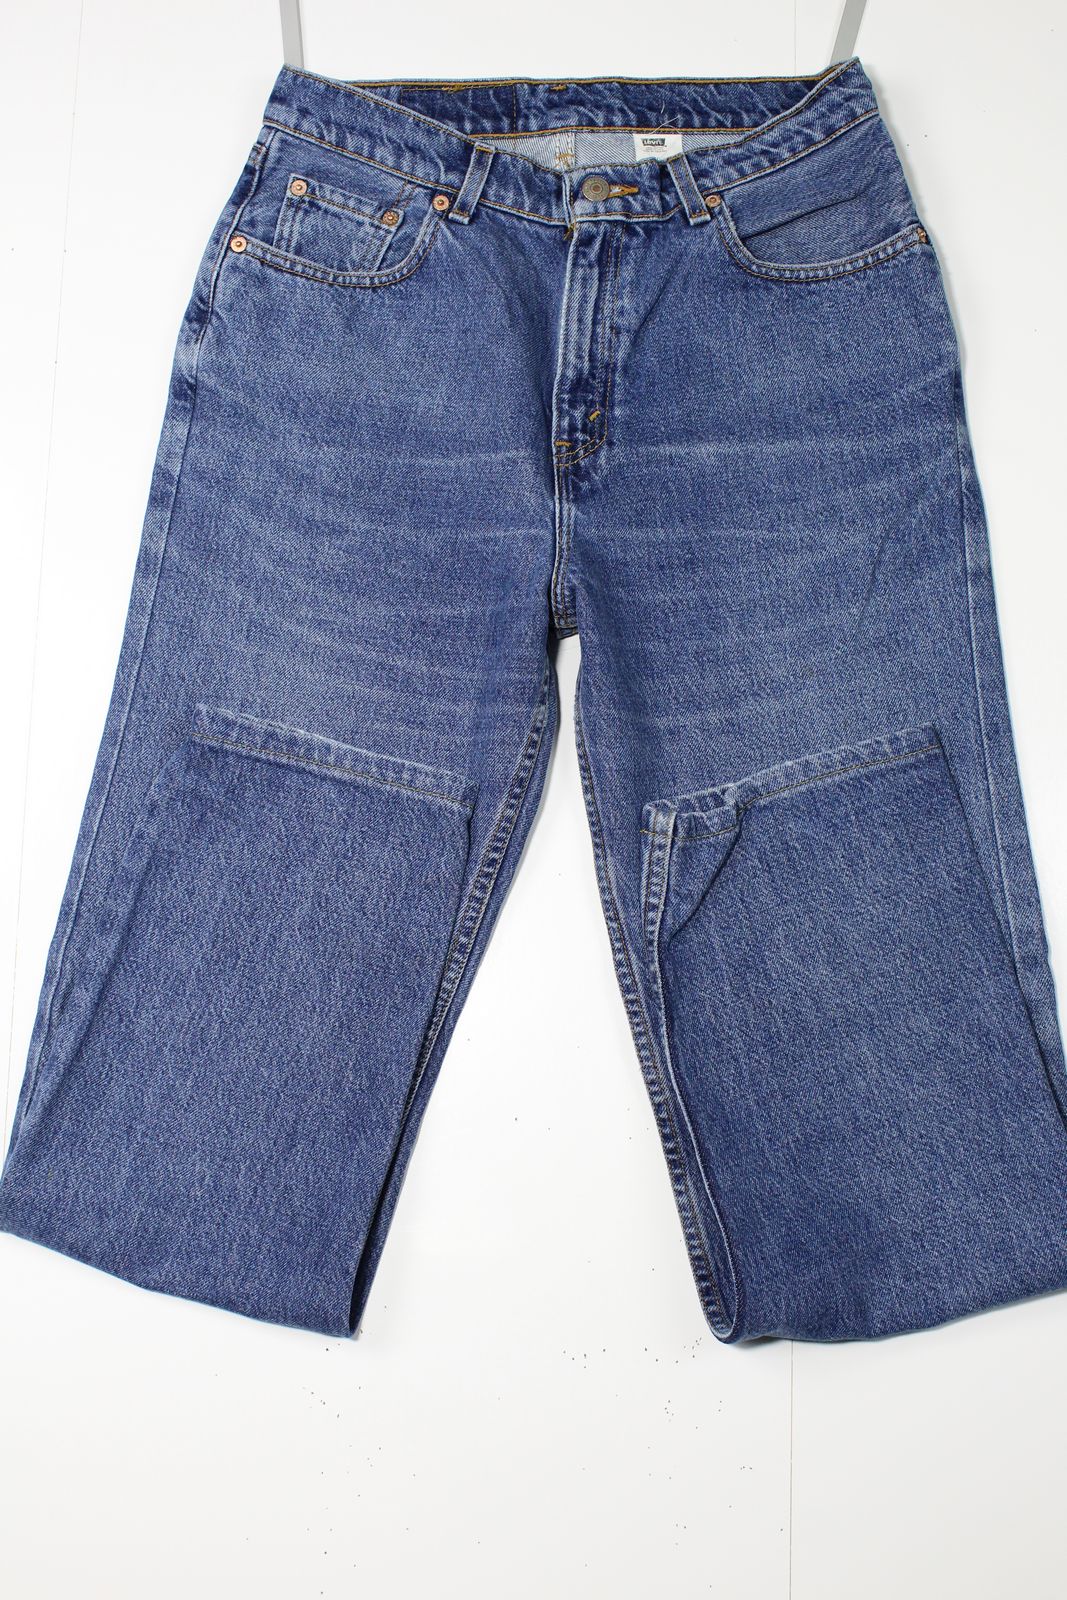 Levi's 560 Loose Fit Taglia L Made In USA Jeans Vintage